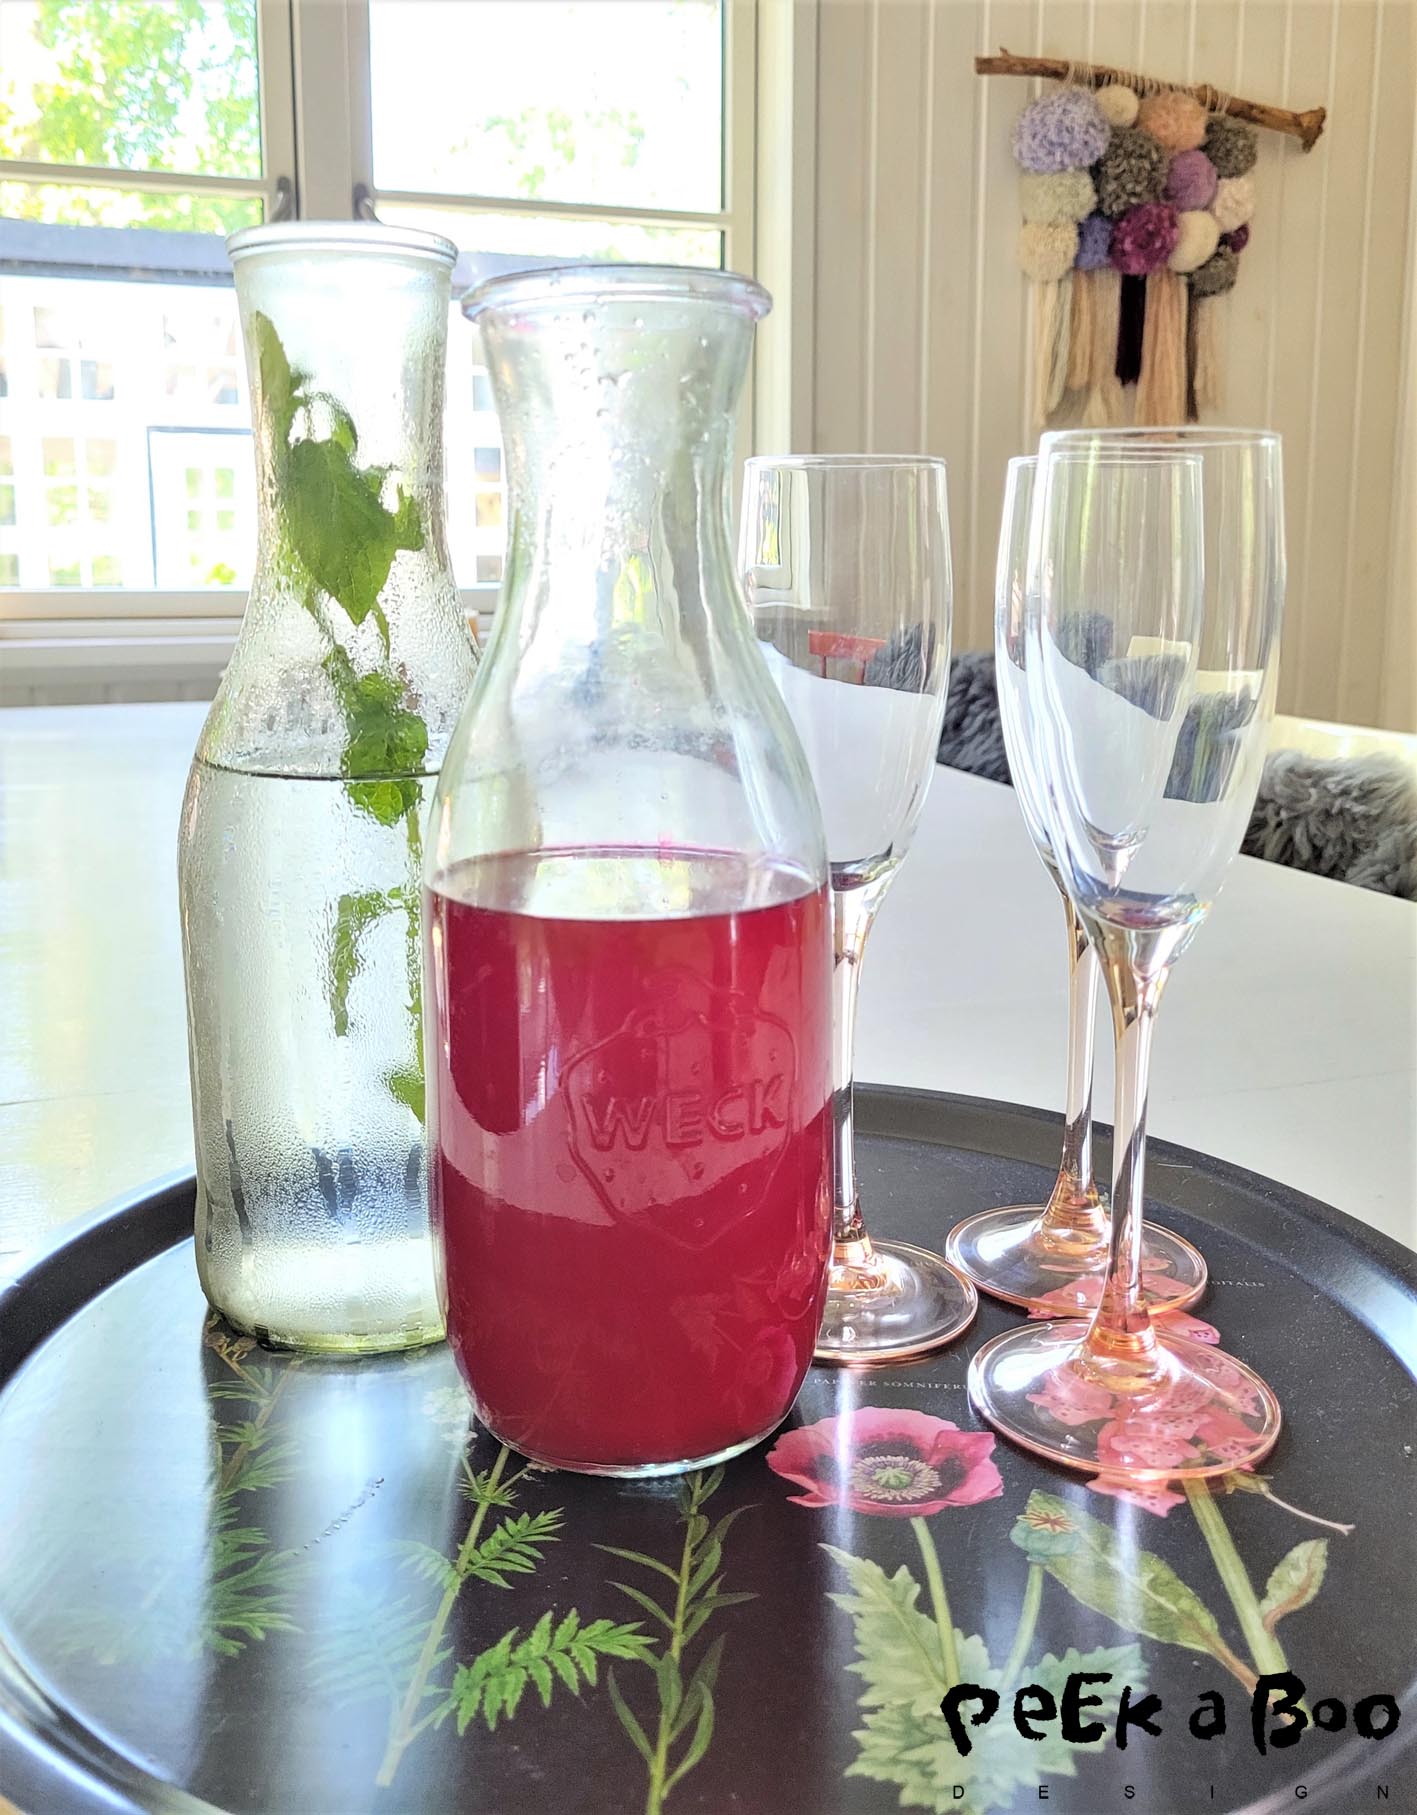 The juice from the red ribes currant goes well with both sparkling water and processo.